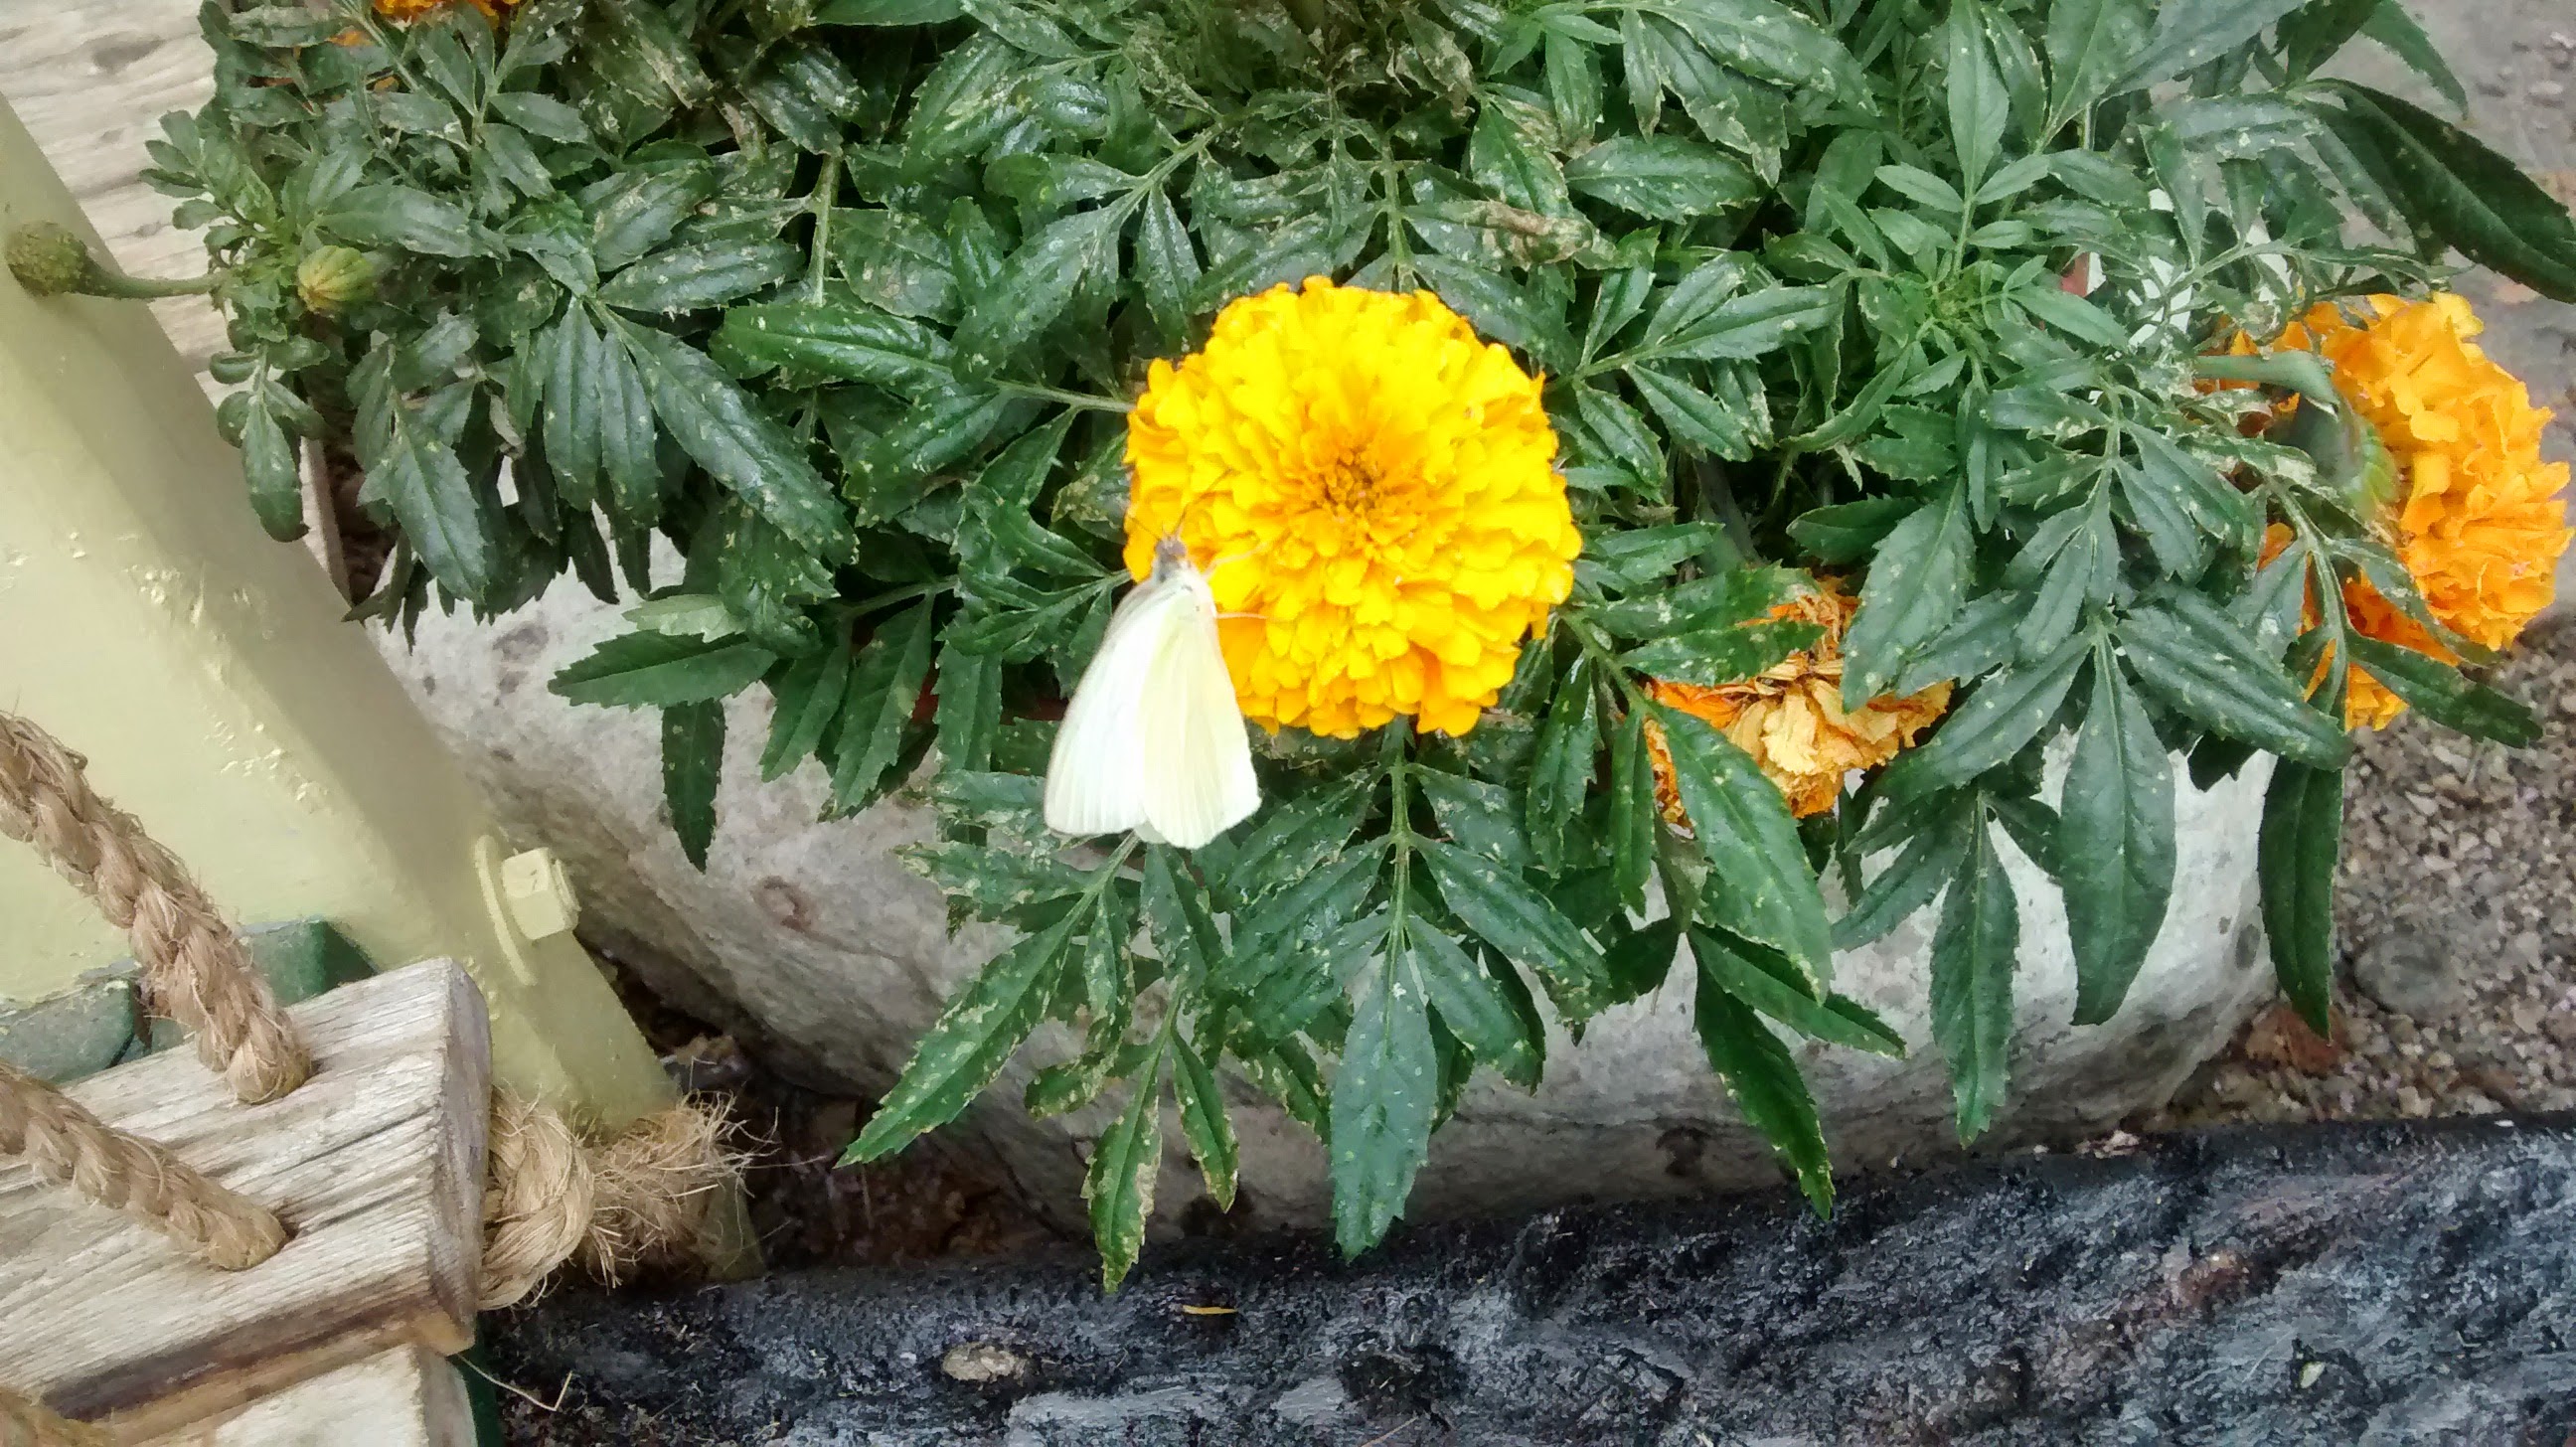 Southern White butterfly